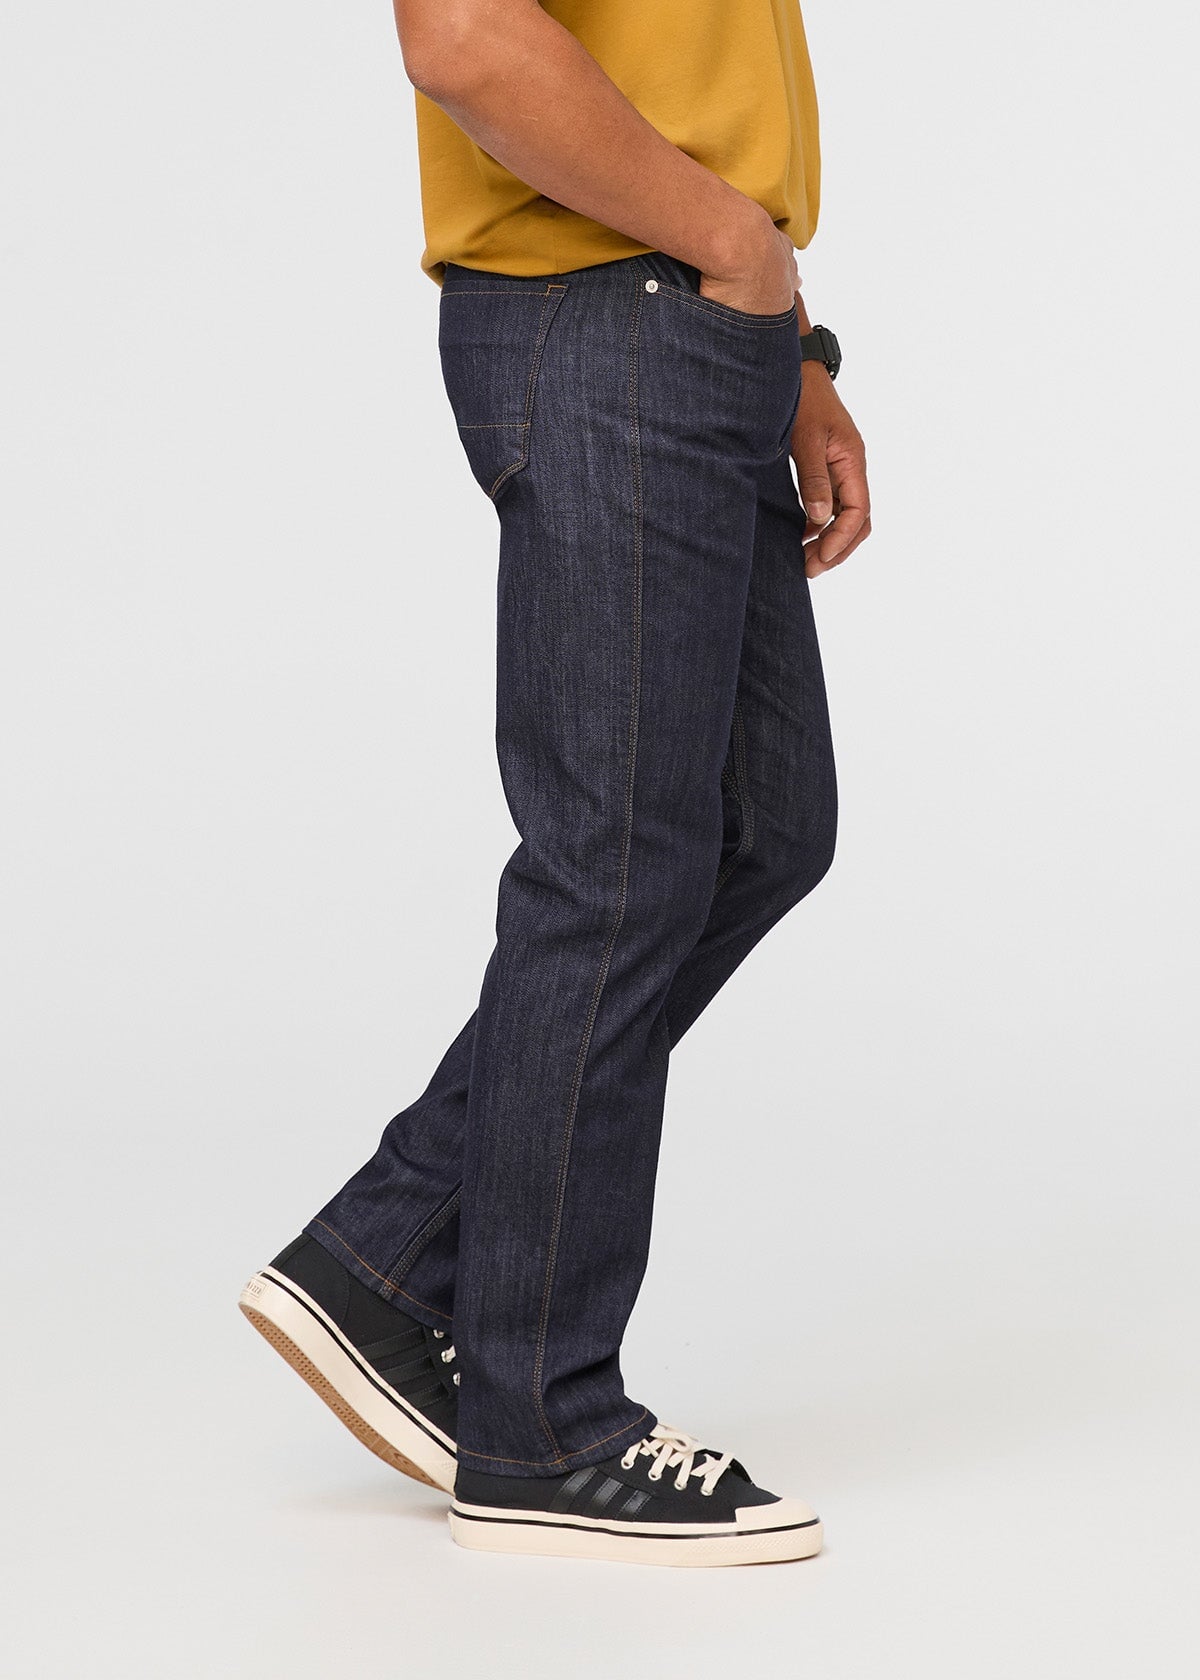 Close-Fitting Regular On The Waist Gray Slim Fit Jeans Size: W32 L30